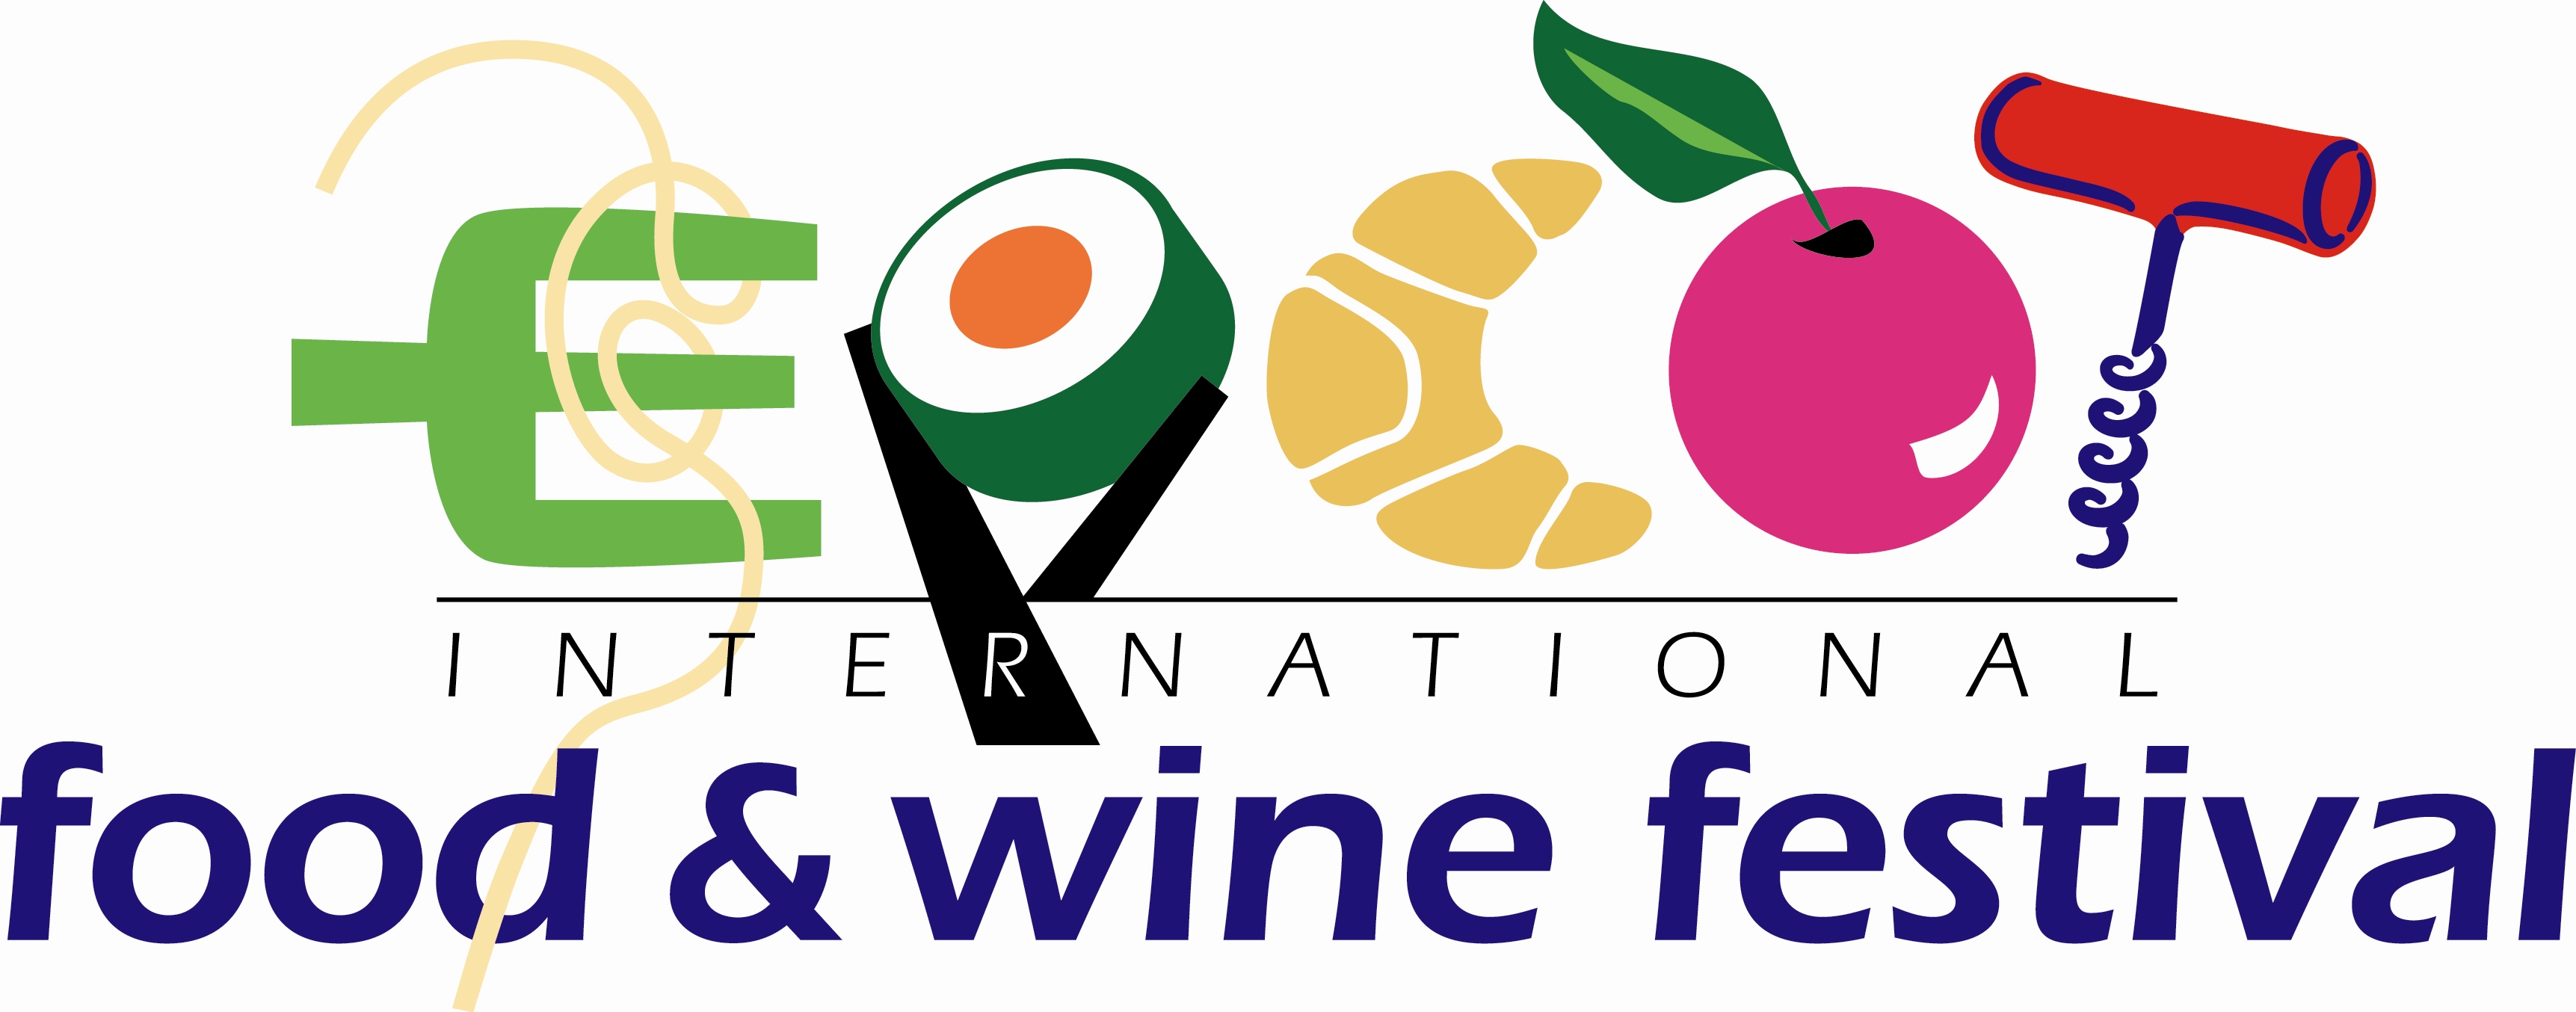 An extra week of Epcot Food and Wine Festival this fall!